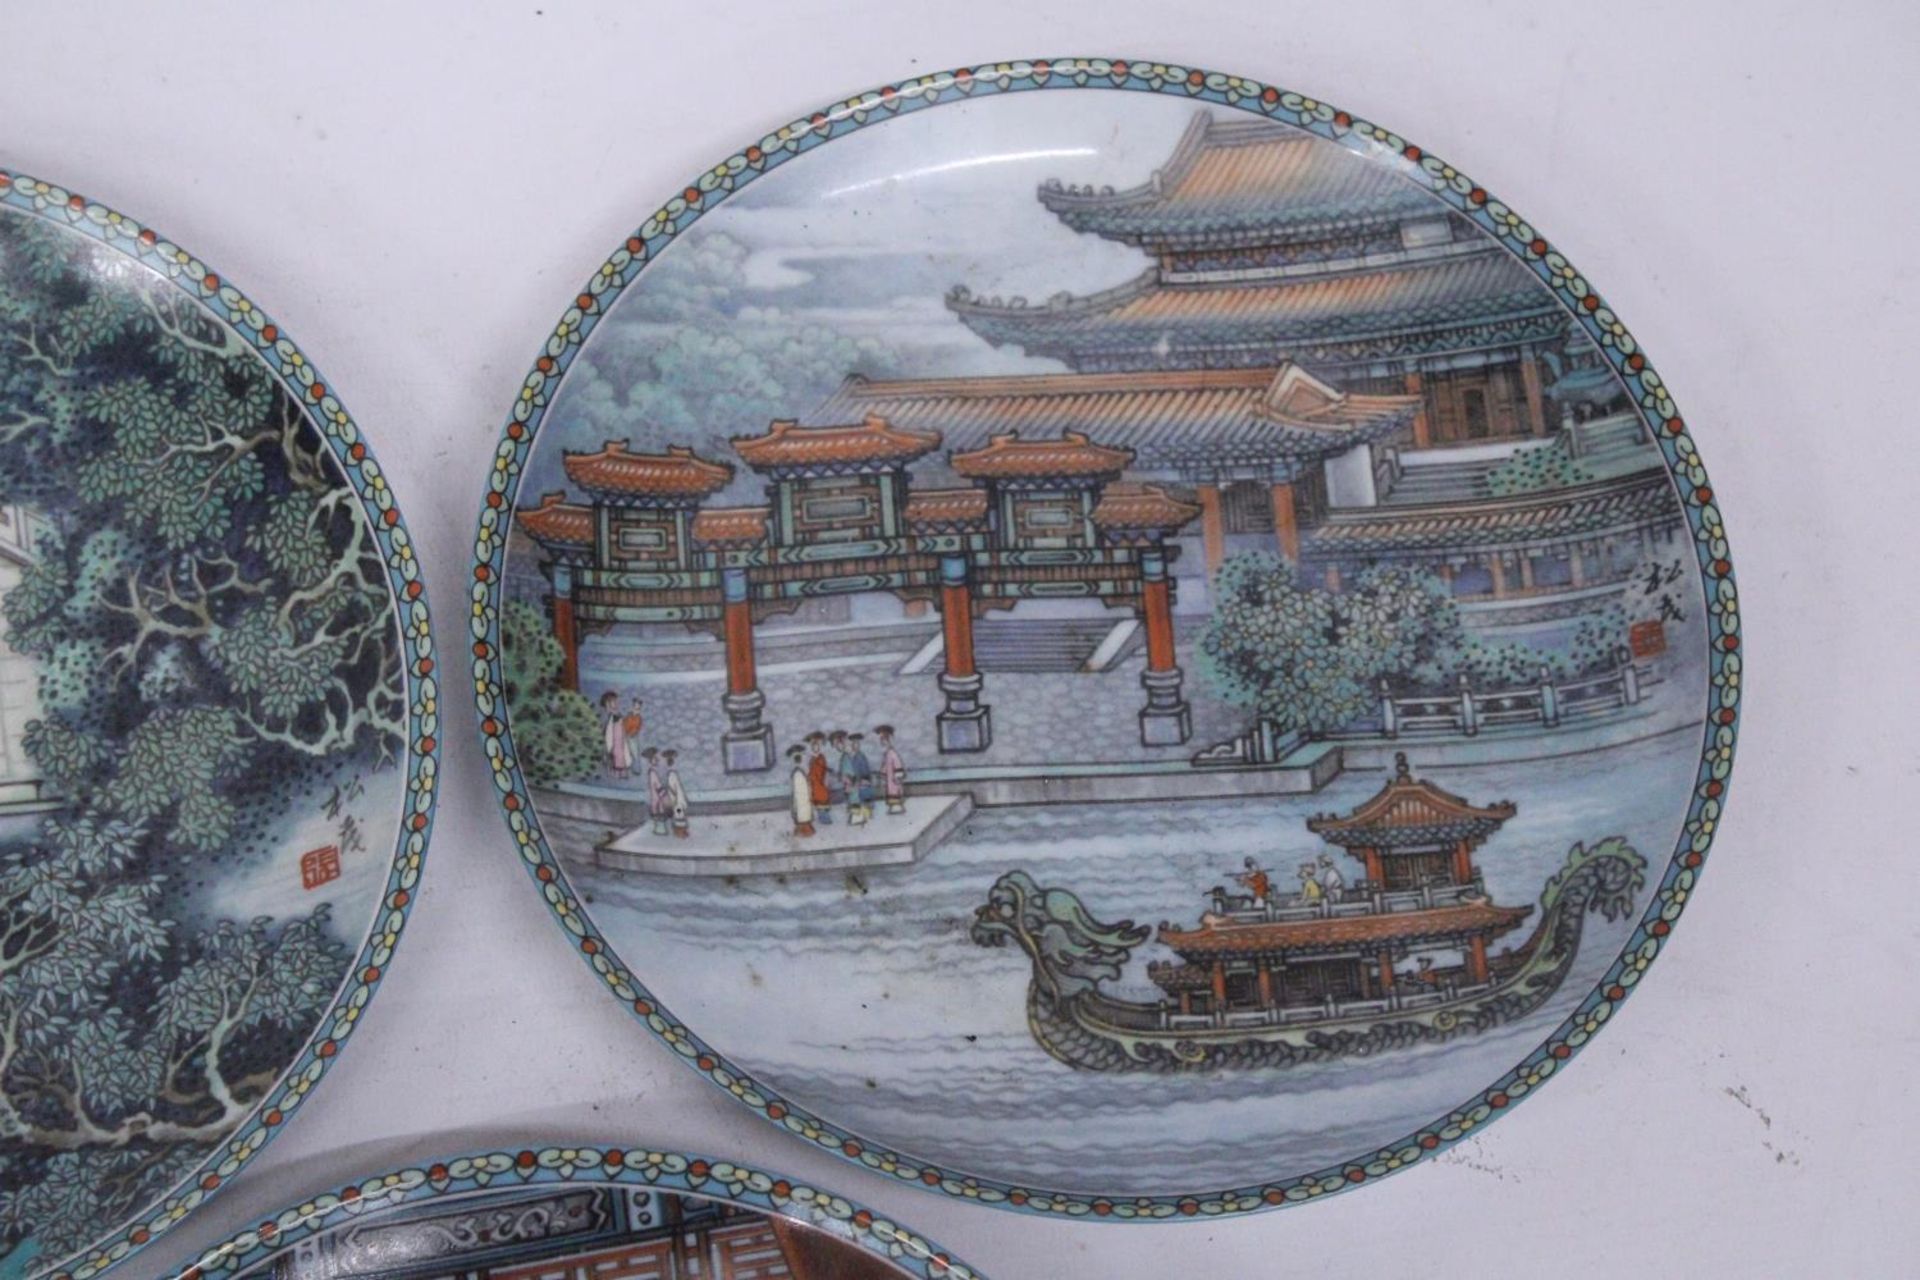 FIVE VINTAGE IMPERIAL JINGDEZHEN PORCELAIN PLATES SCENES FROM THE SUMMER PALACE - 21 CM - Image 4 of 8